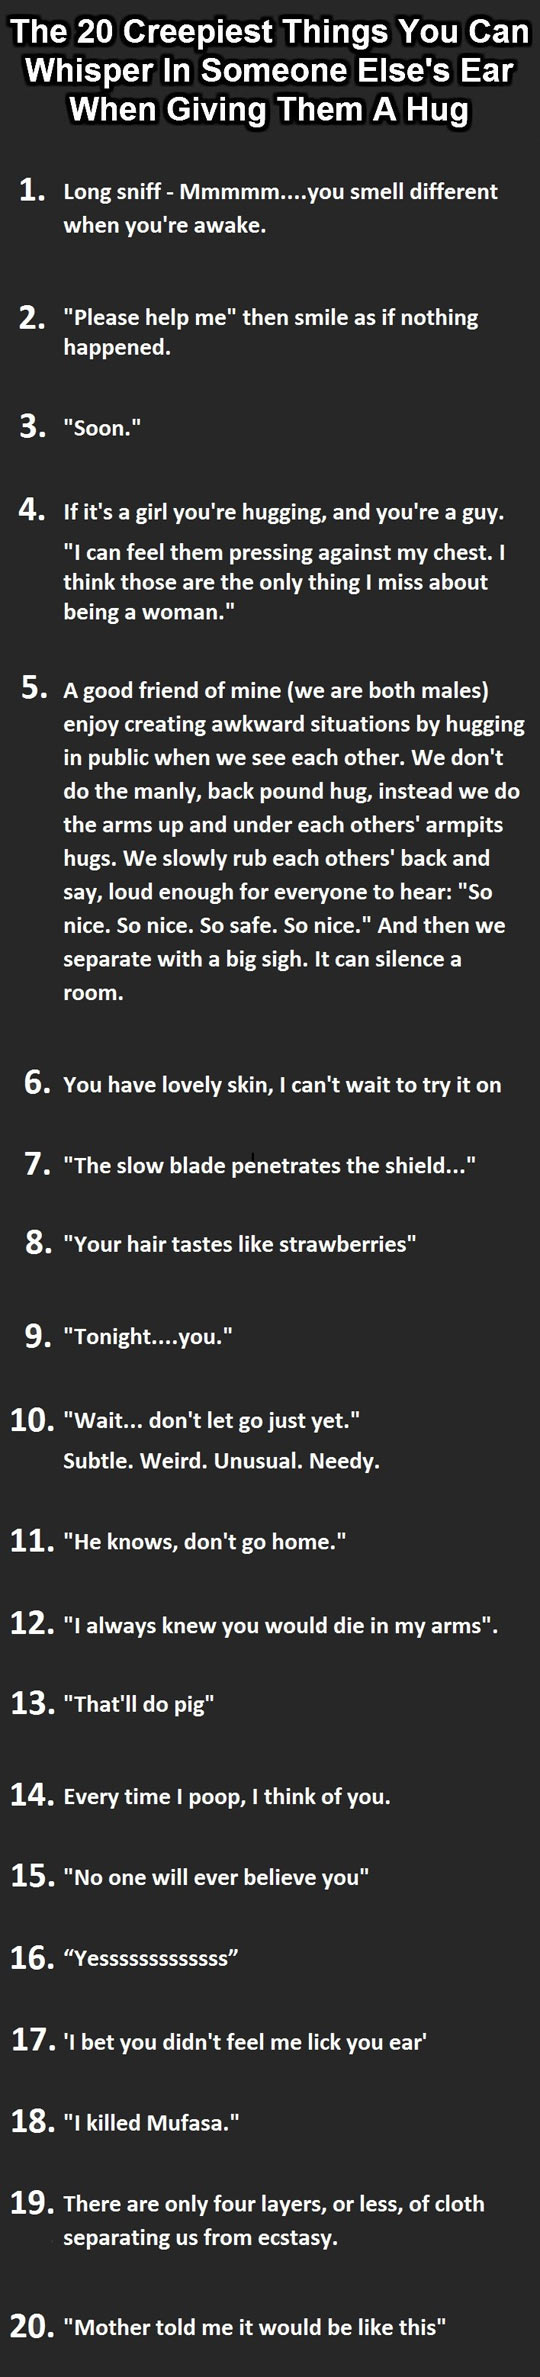 20 creepy things to whisper in her ear.